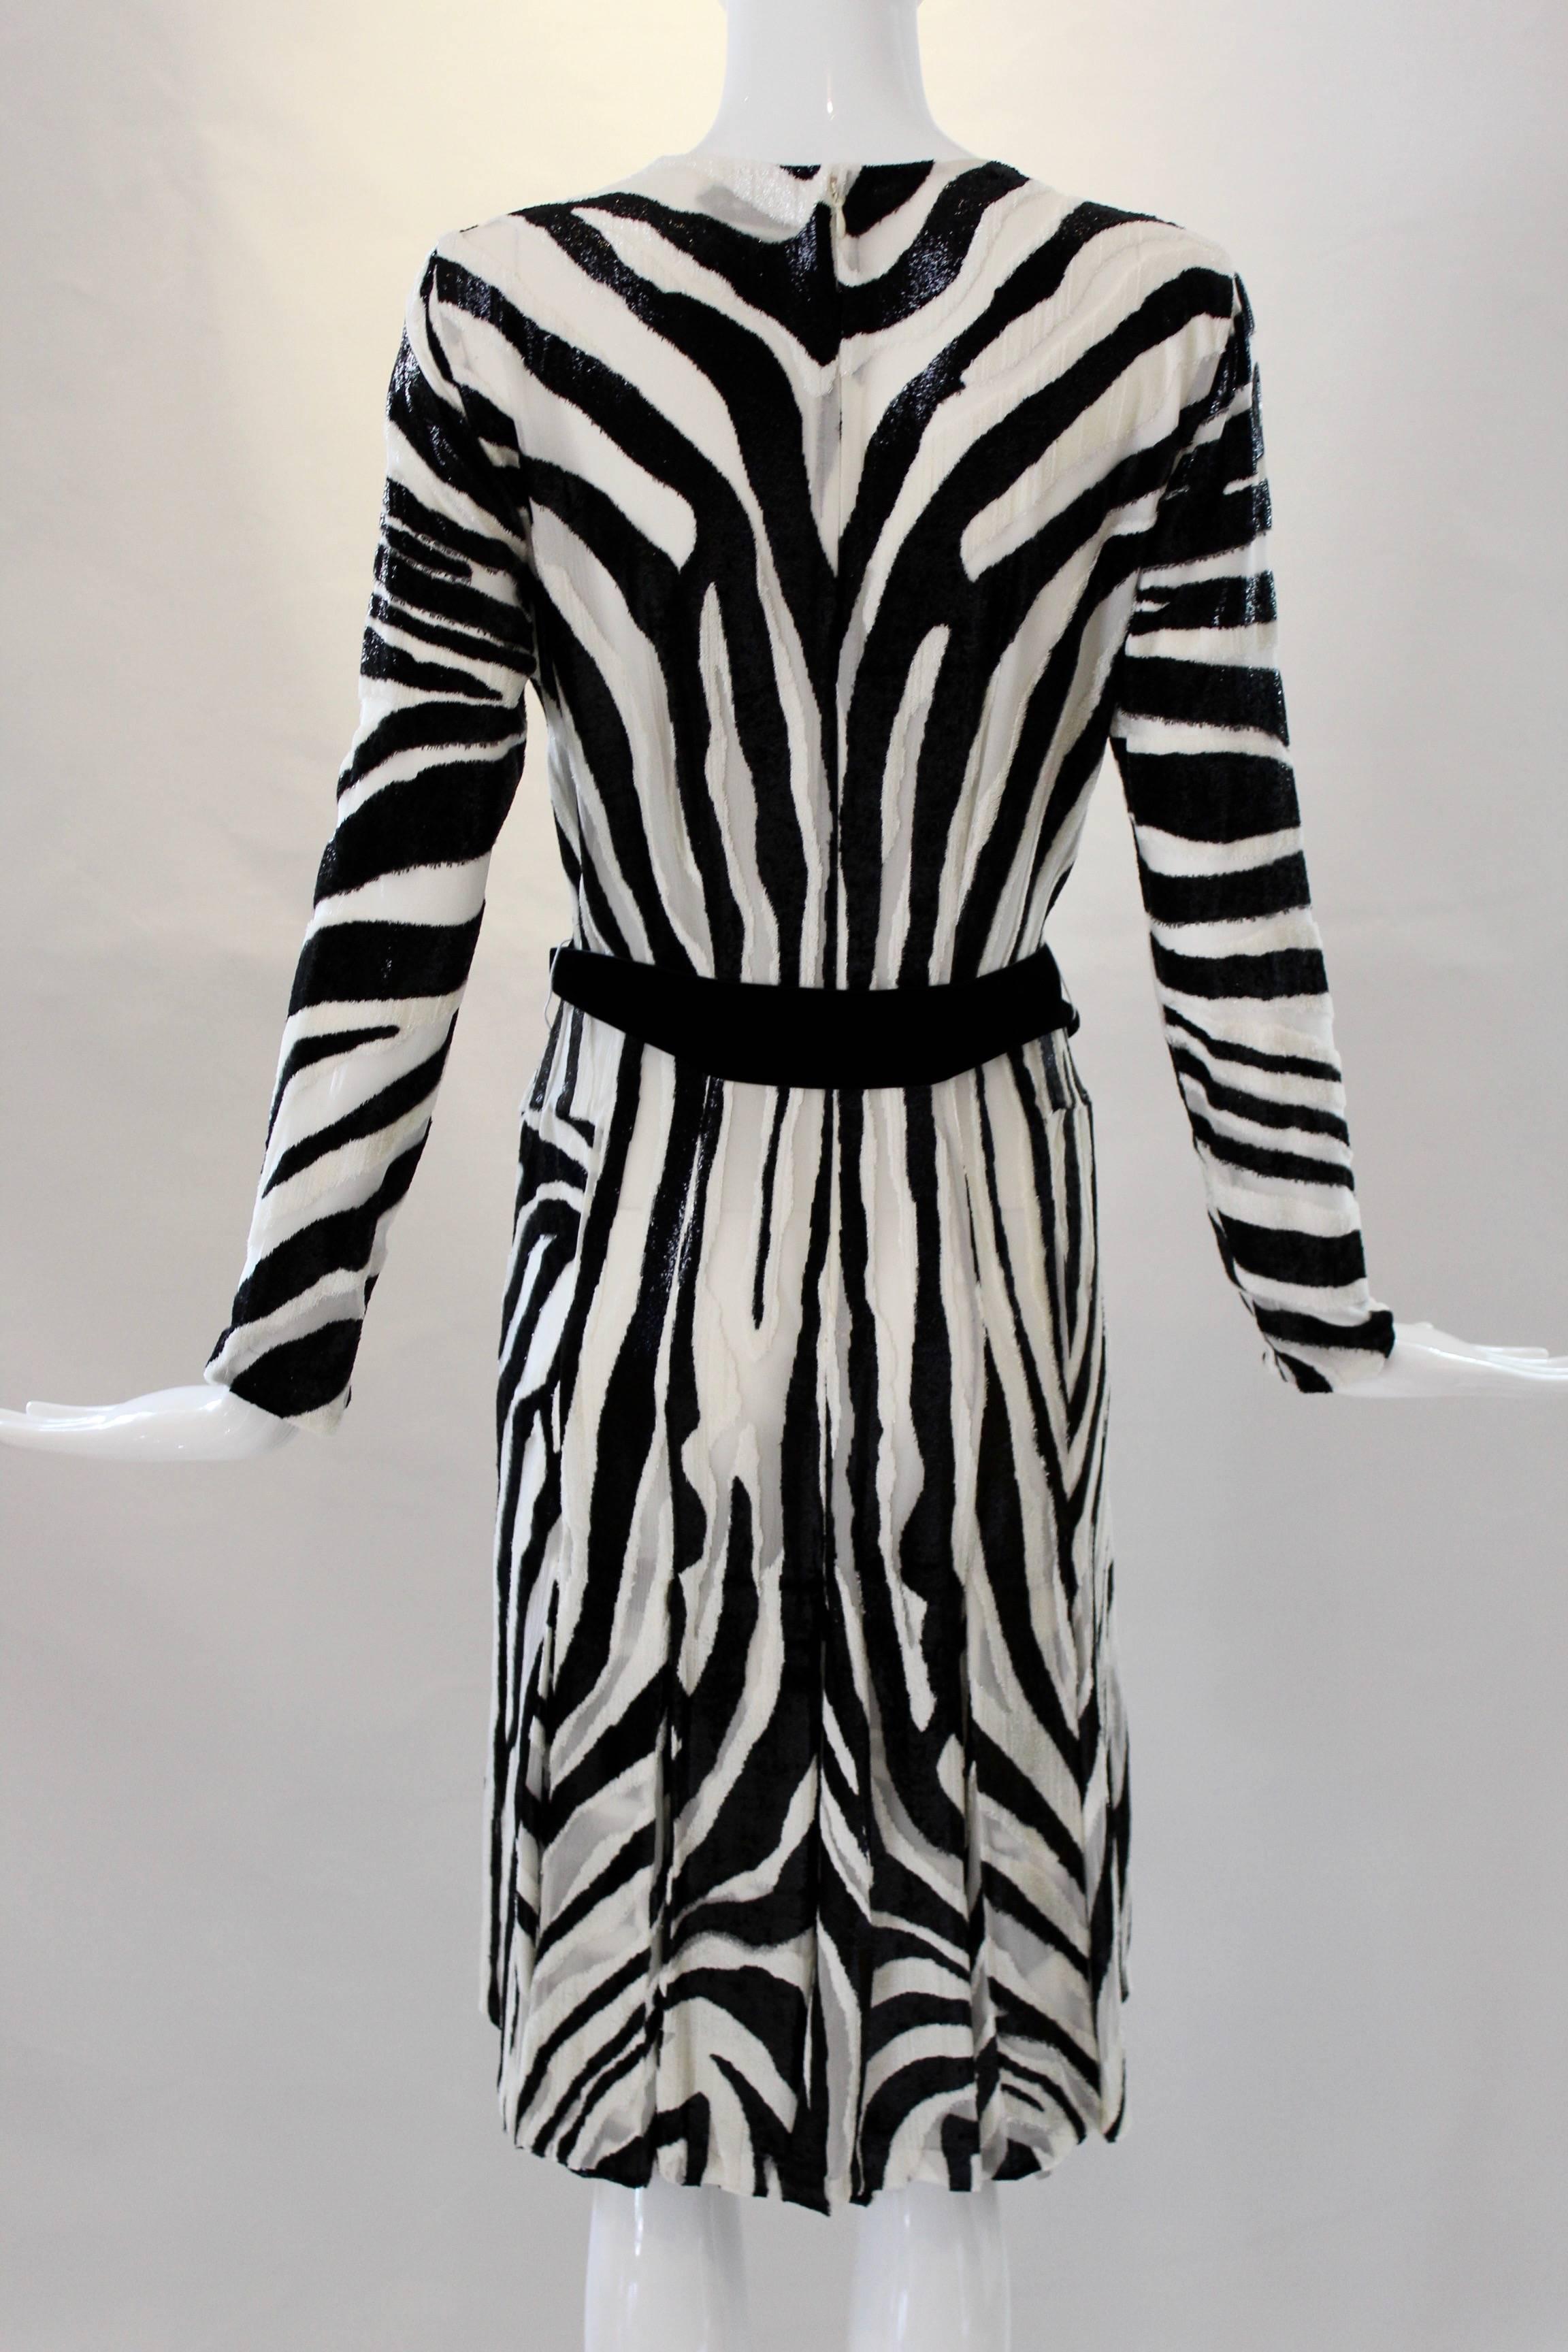 Channel your inner party animal in this stunning Tom Ford number! This zebra print textured tinsel dress has three-quarter length sleeves and comes in an A-line silhouette. With a scoop neckline and zip closure, this party dress is finished with a